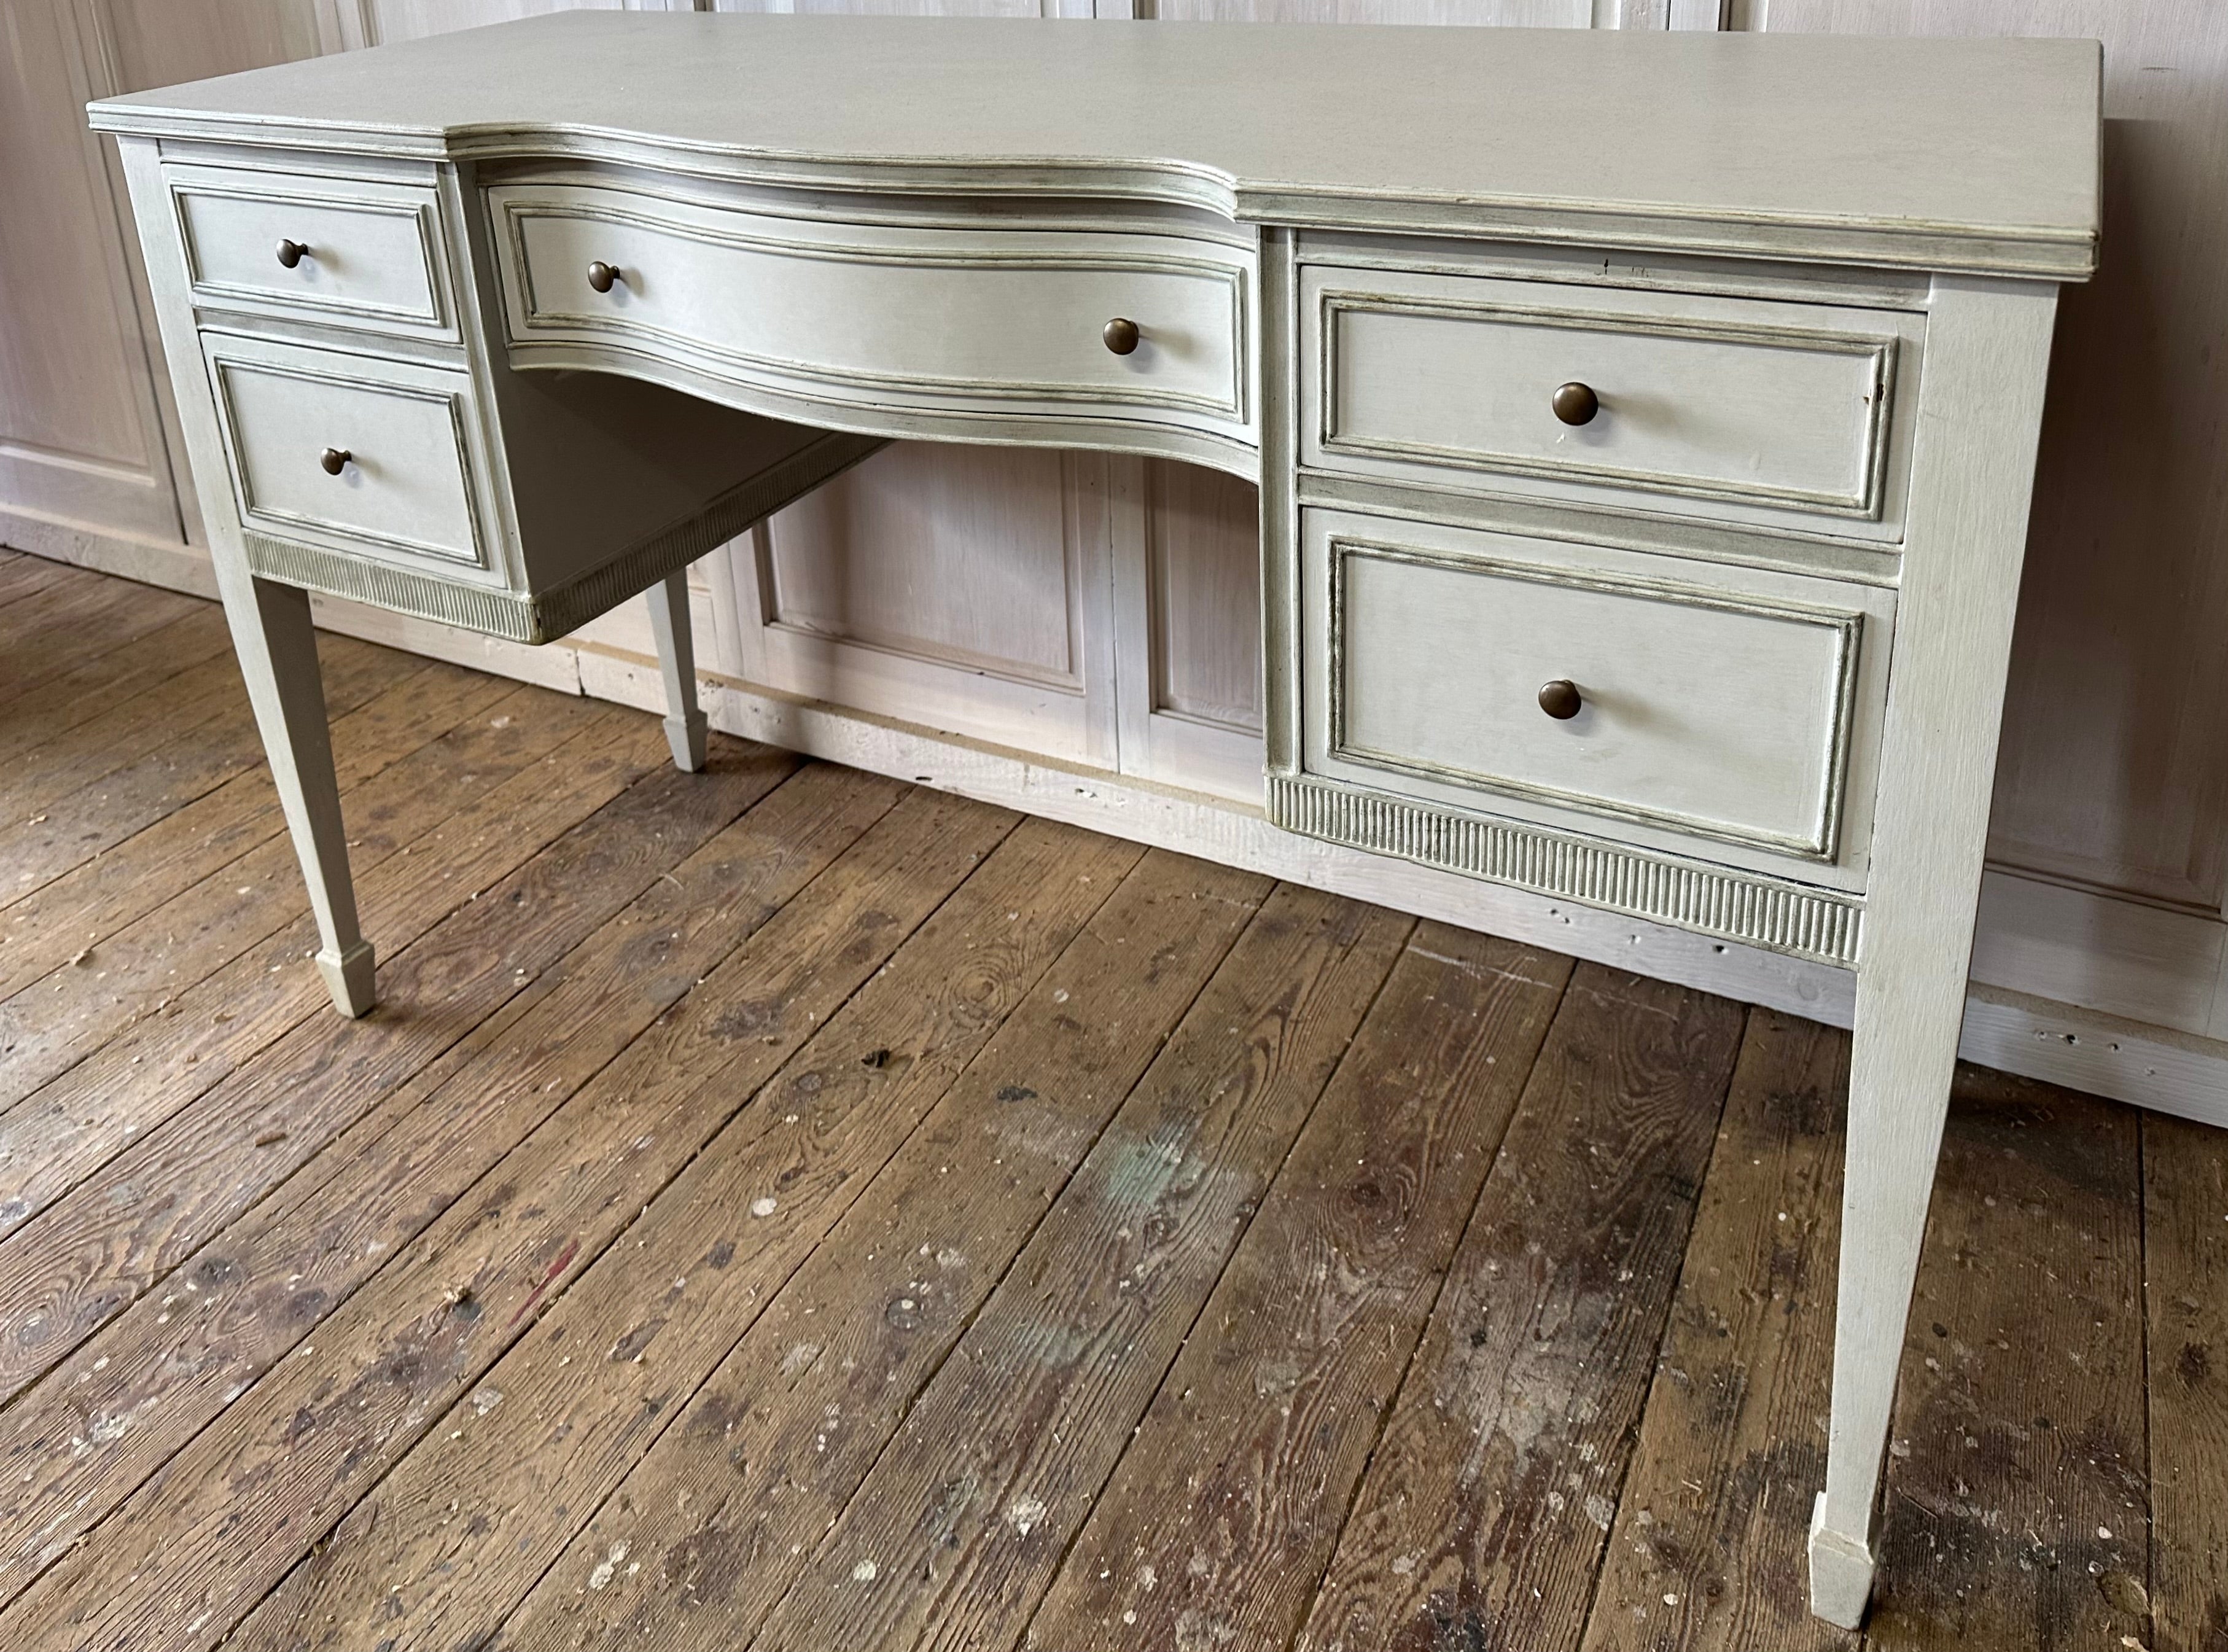 The vintage neoclassical painted dressing table, vanity, desk or night table has gilt detailing, serpentine front, brass pulls and tapered legs. Drawers are dovetailed. Can also be used as side table or nightstand. Painted a very light grey.  Label